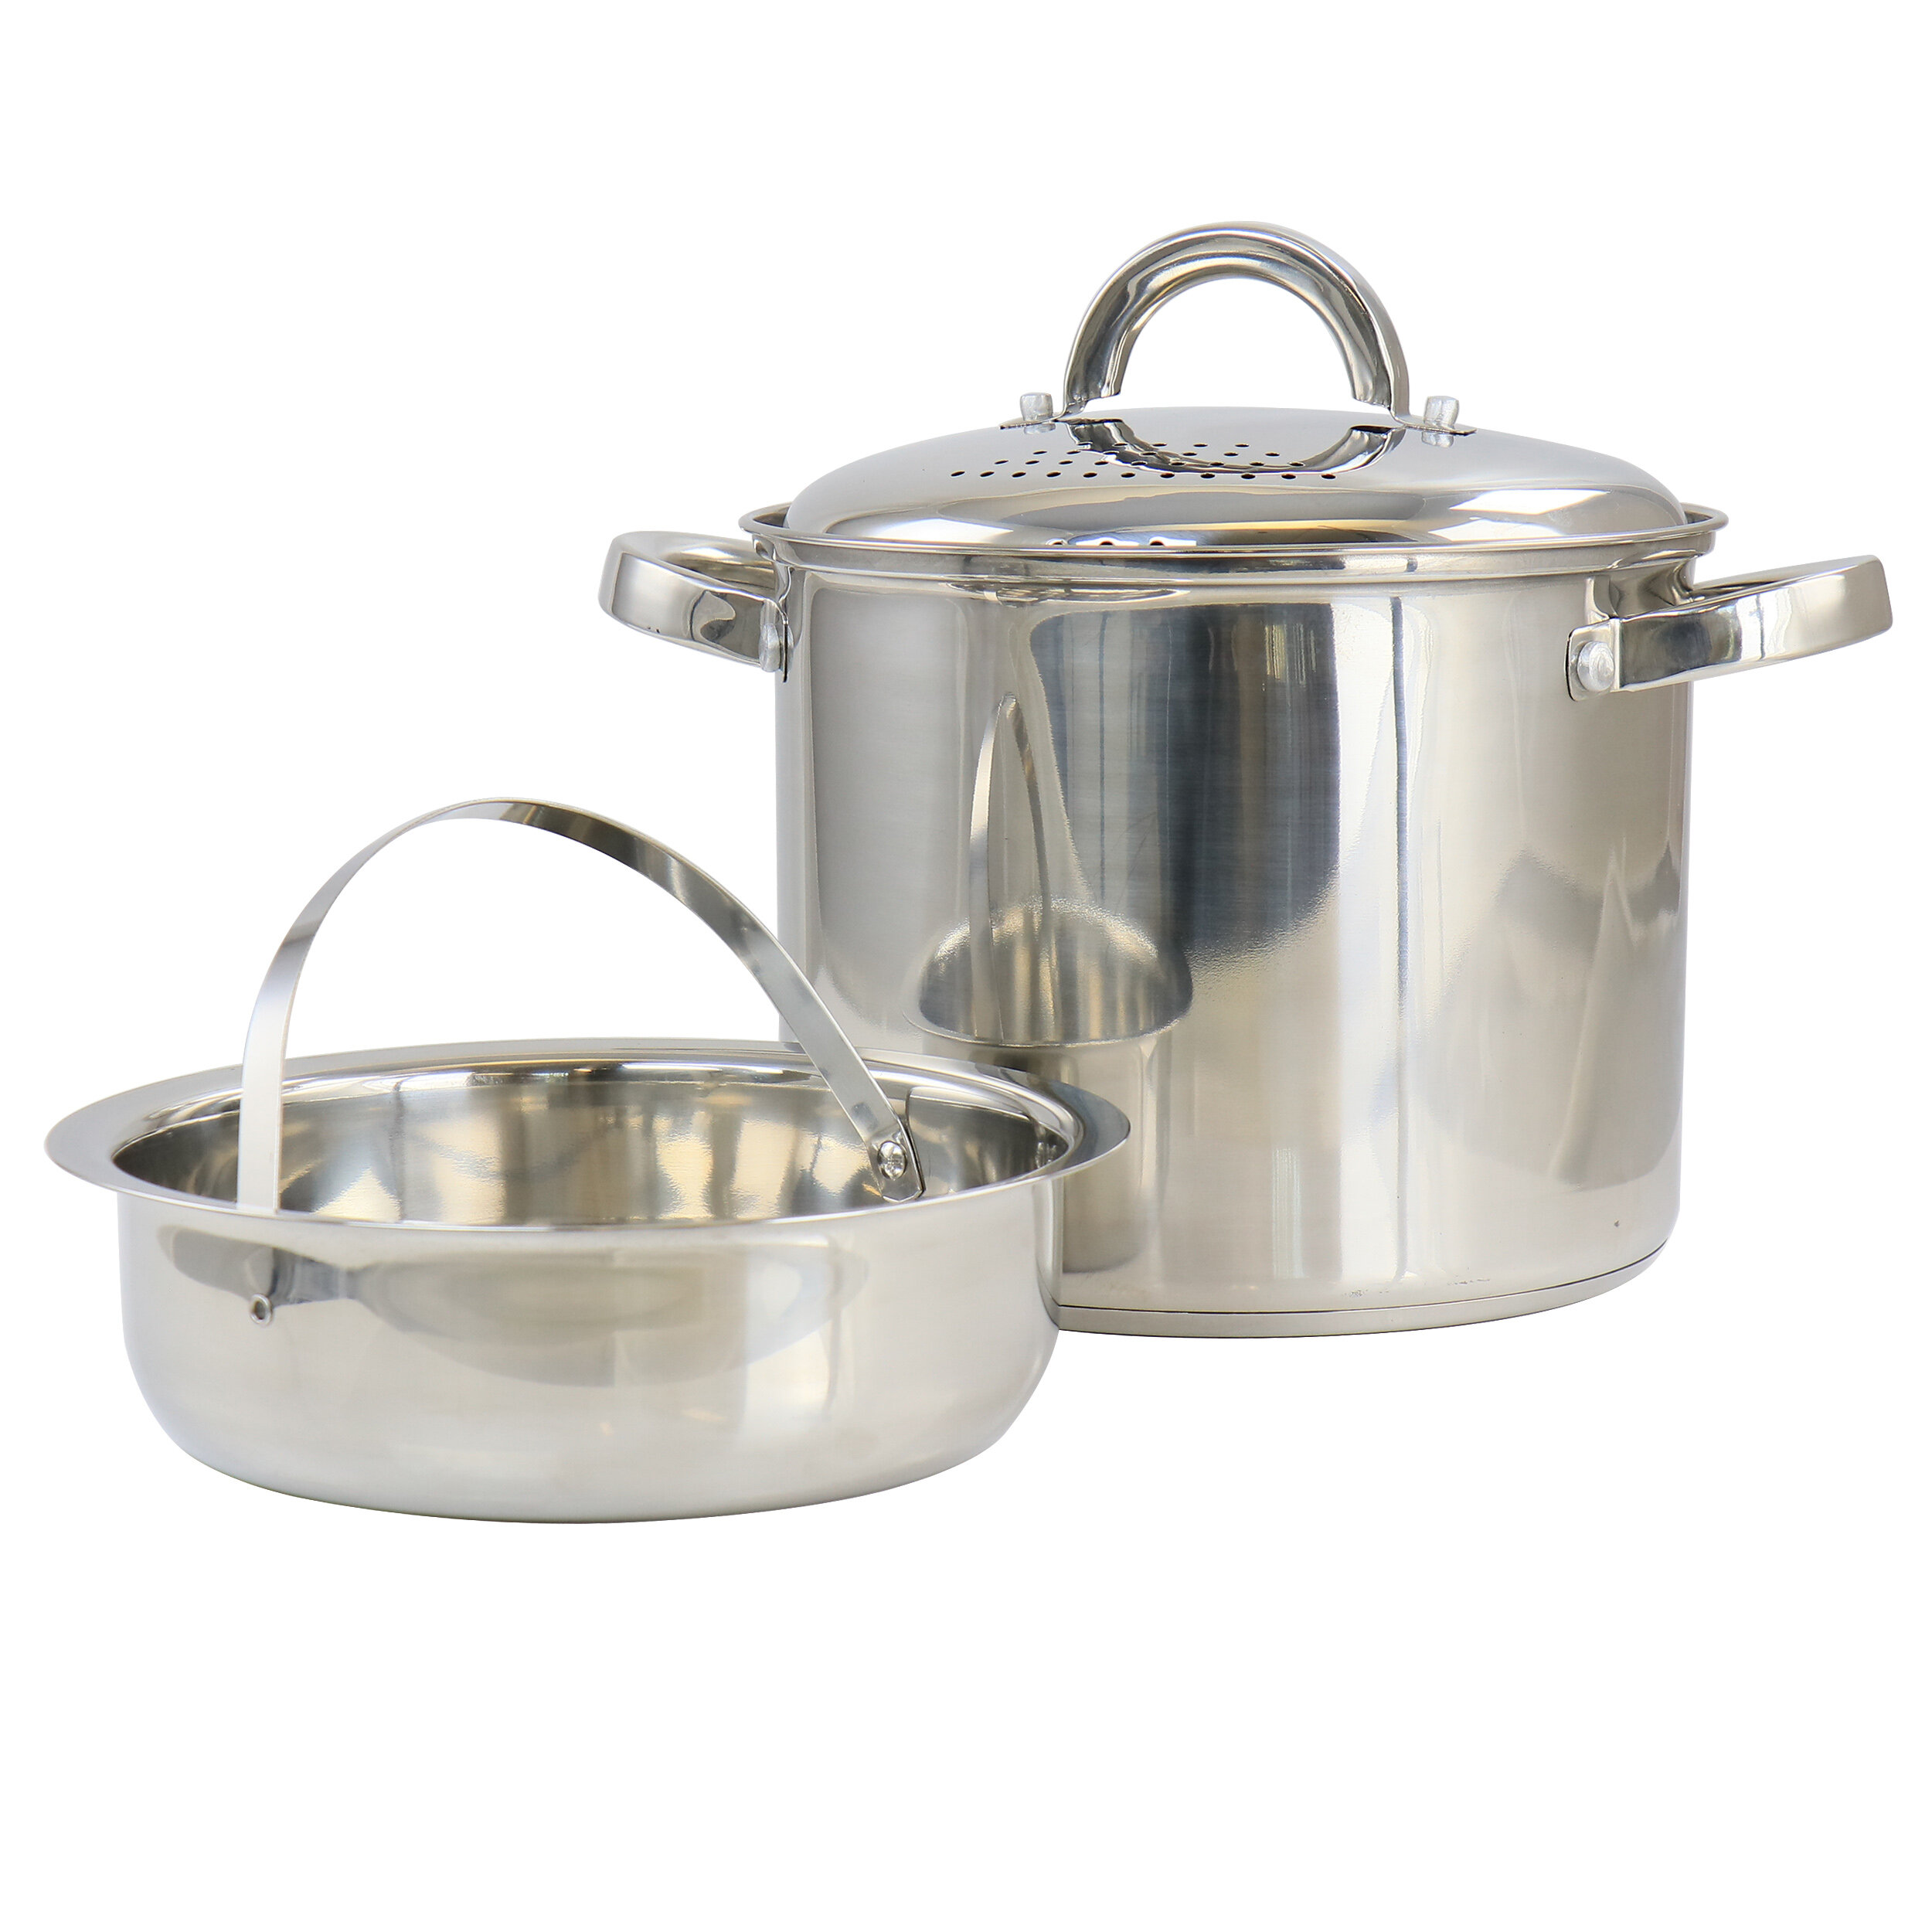 Oster Sangerfield 3-Piece 11-in. Stainless Steel Everyday Pan with Steamer and Lid